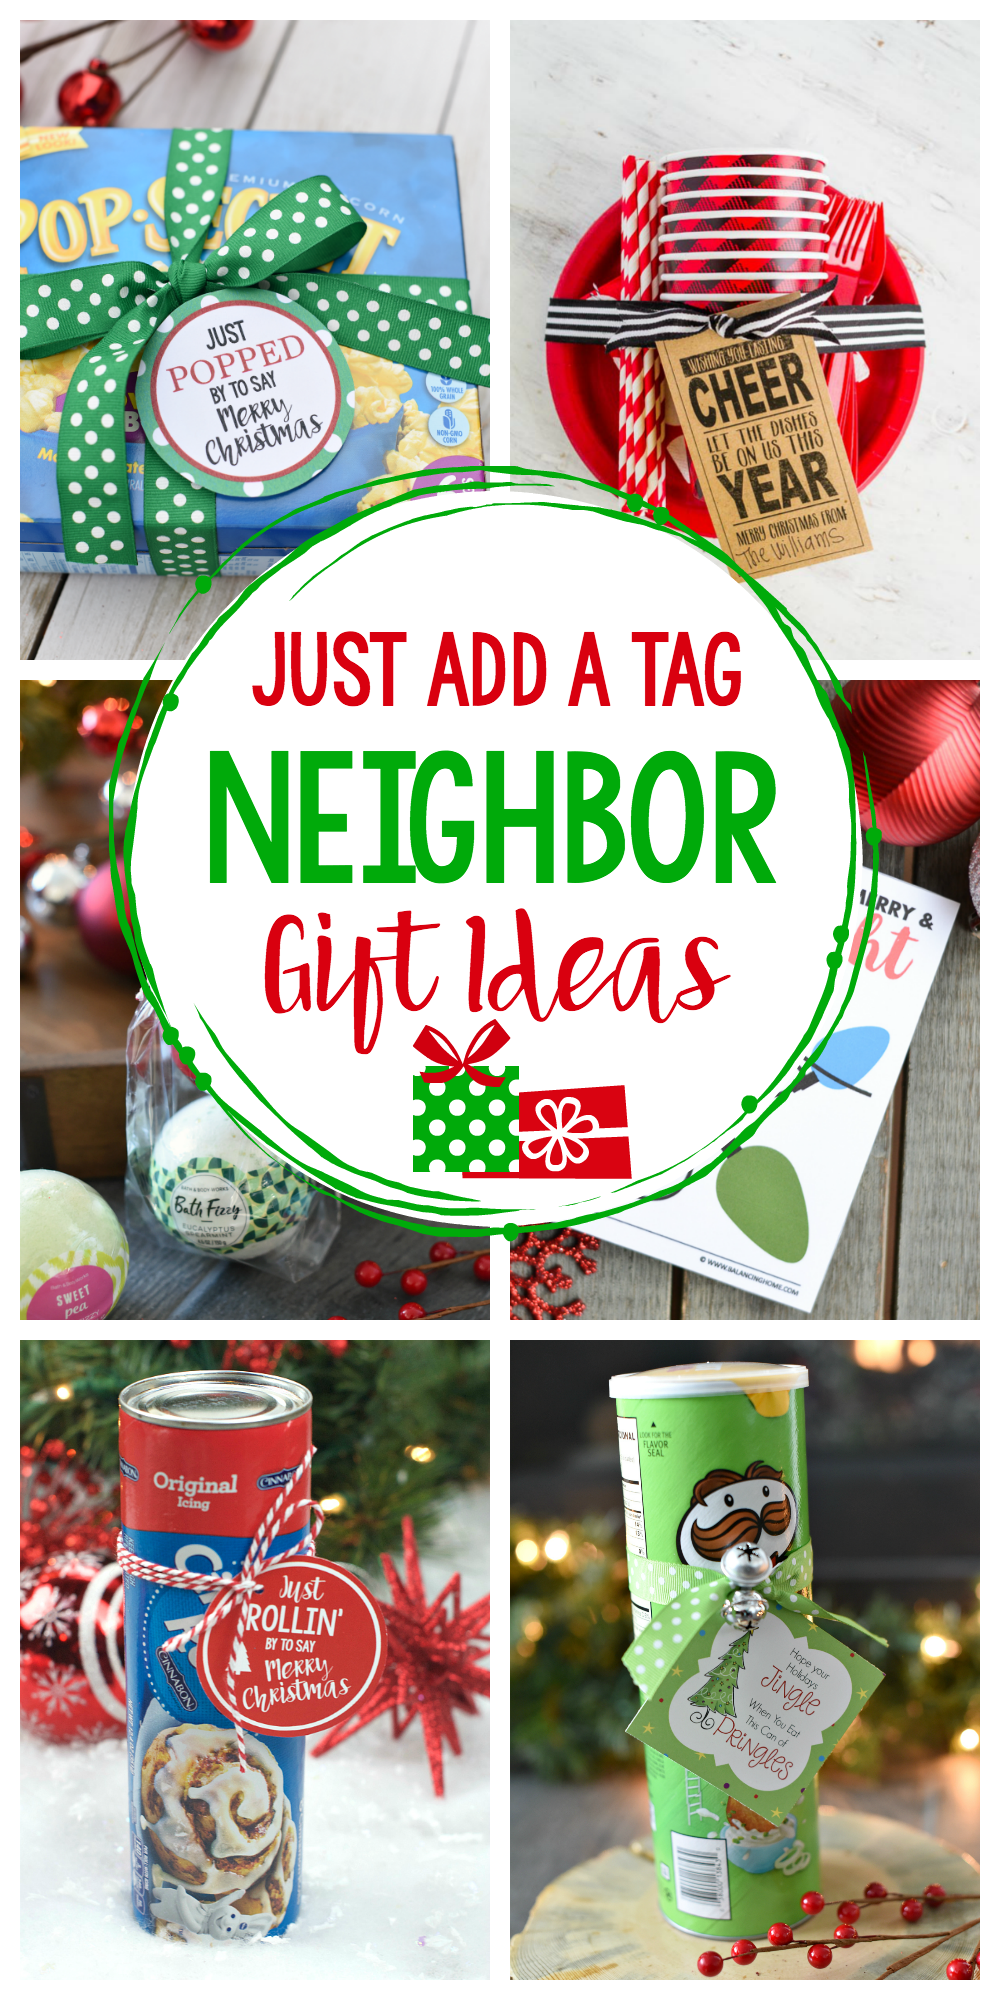 These easy neighbor gifts for Christmas just need a tag added-that's it! Plus they are fun ideas your neighbors will actually like. #christmas #christmasgifts